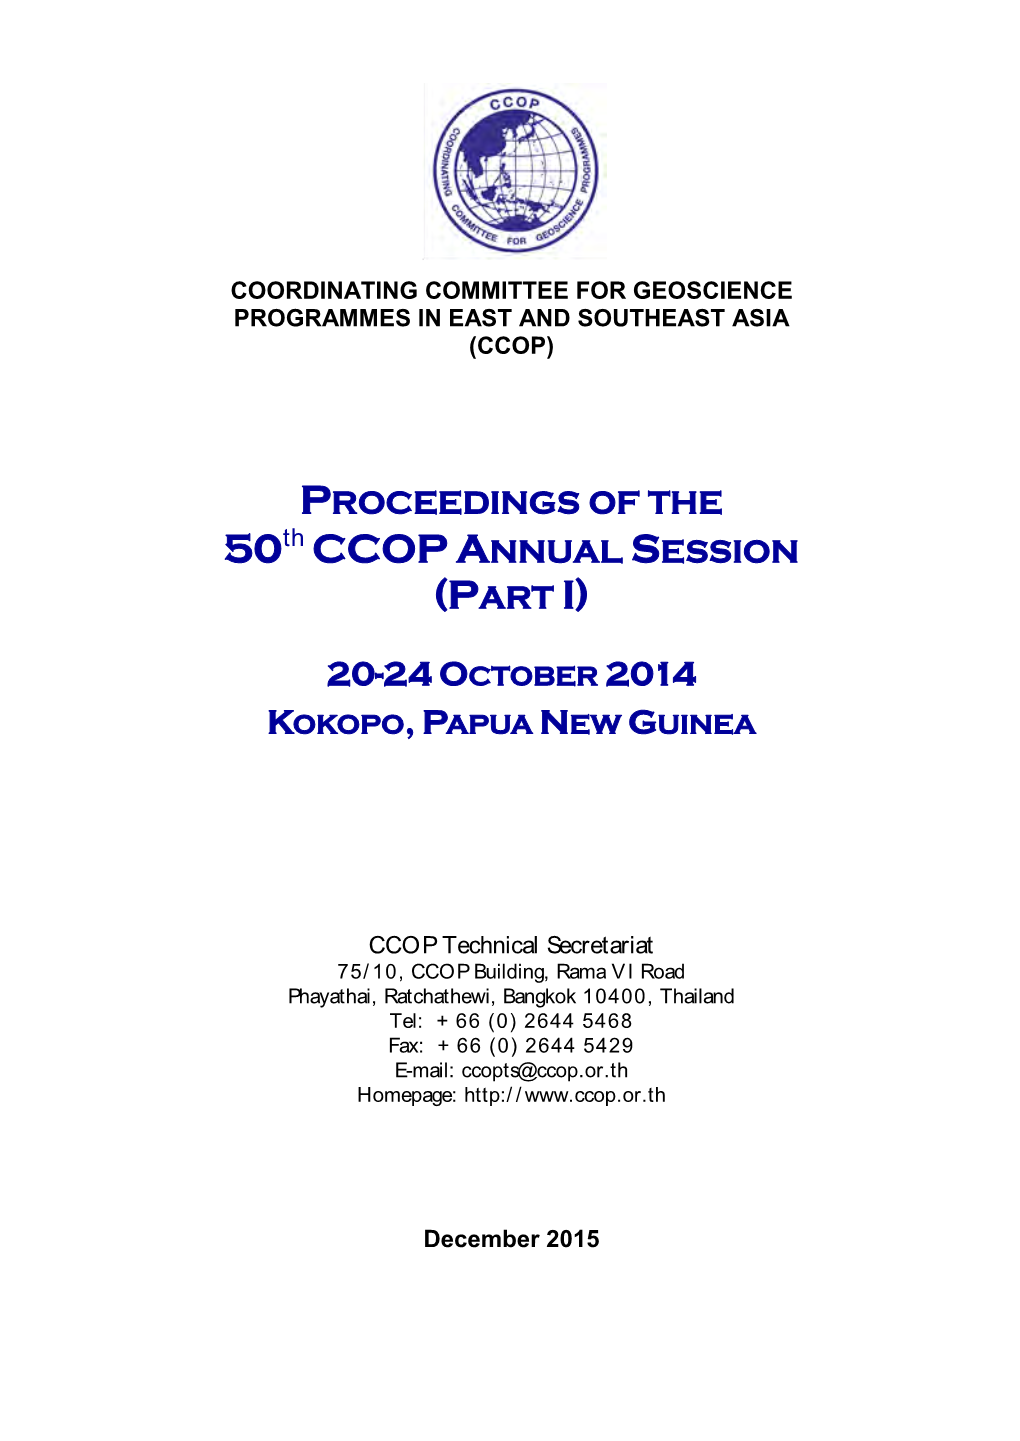 PROCEEDINGS of the 50Th CCOP ANNUAL SESSION (PART I)